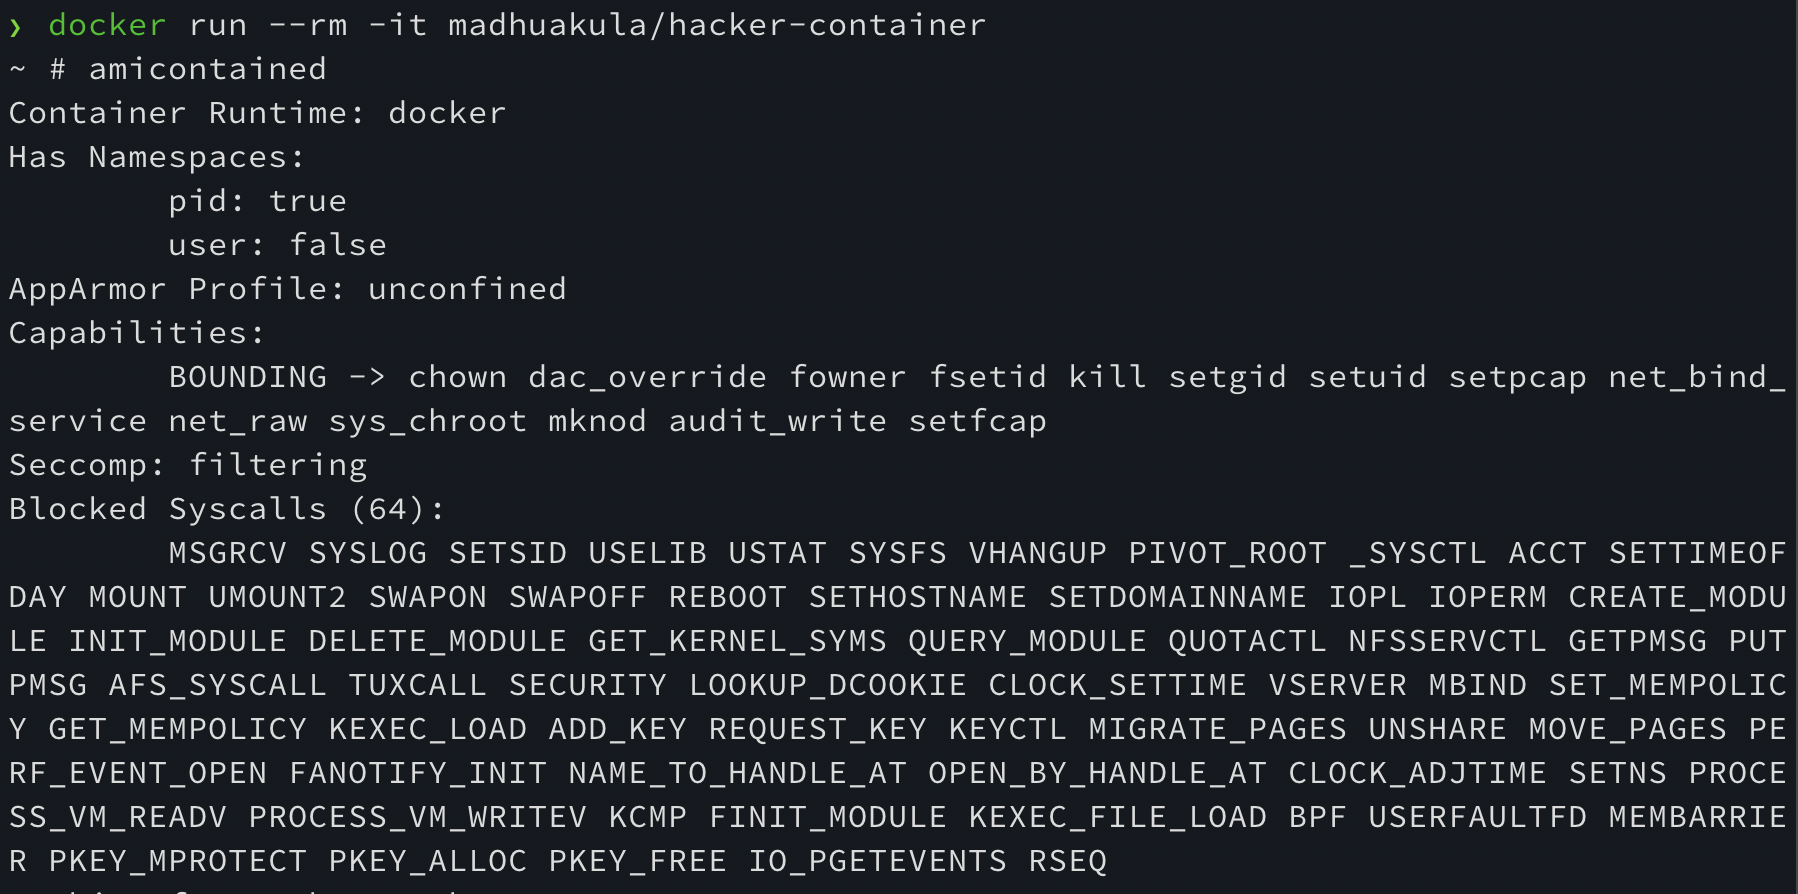 Hacker Container in Action